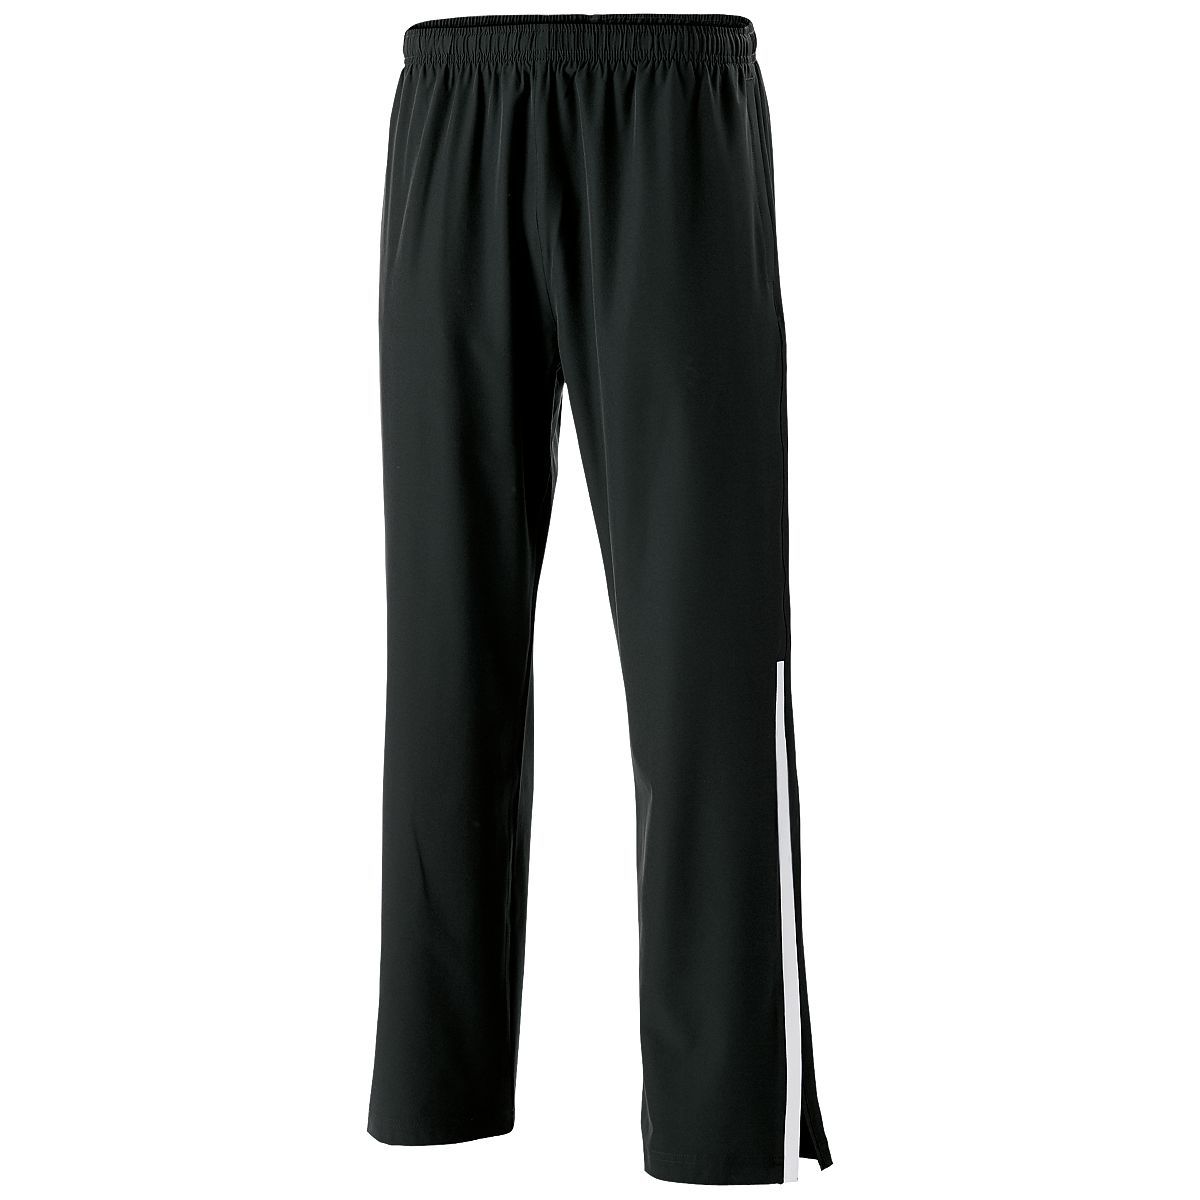 Holloway Weld Pant in Black/White  -Part of the Adult, Adult-Pants, Pants, Holloway, Weld-Collection product lines at KanaleyCreations.com